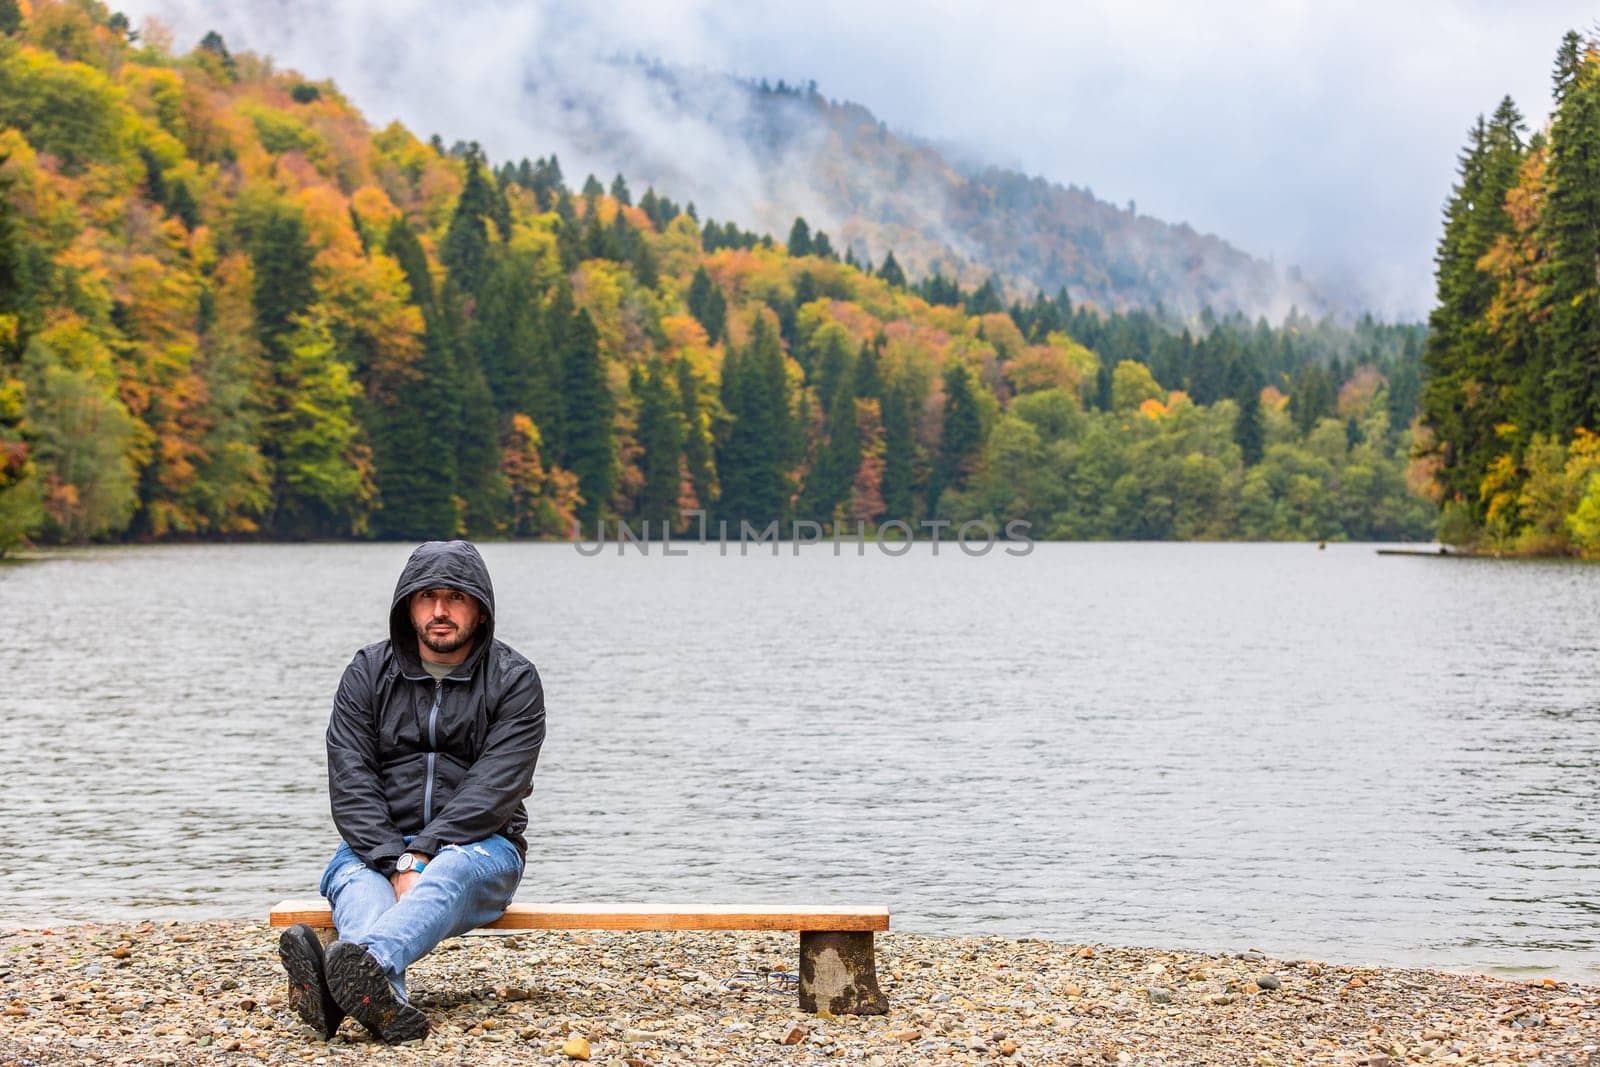 Man on the shore of a lake in the mountains by Yurich32